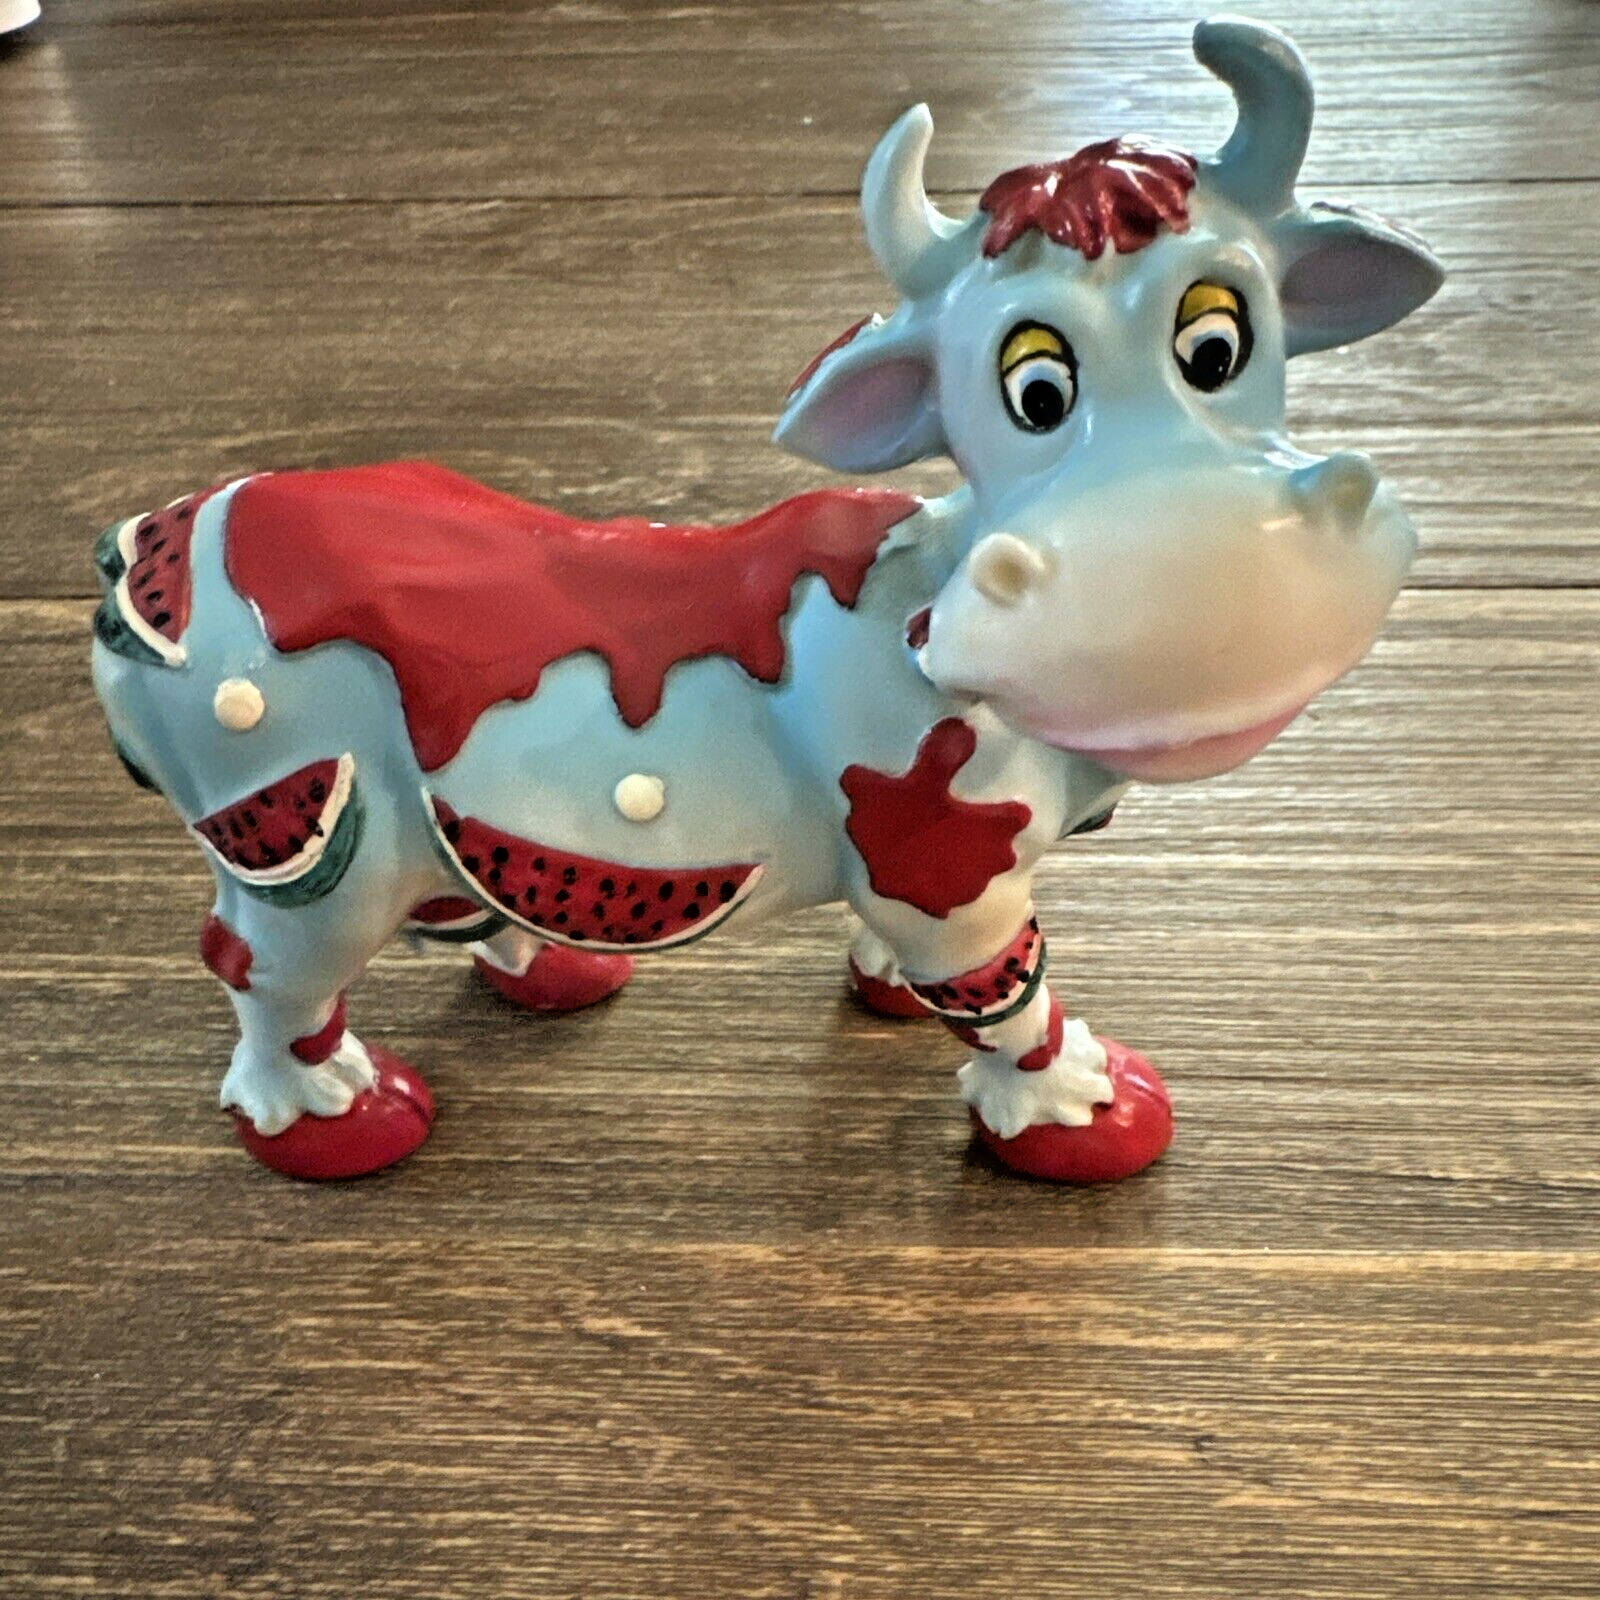 Resin Cow Figurine With Watermelon Design 5” Tall Hard To Find Fun Unbranded